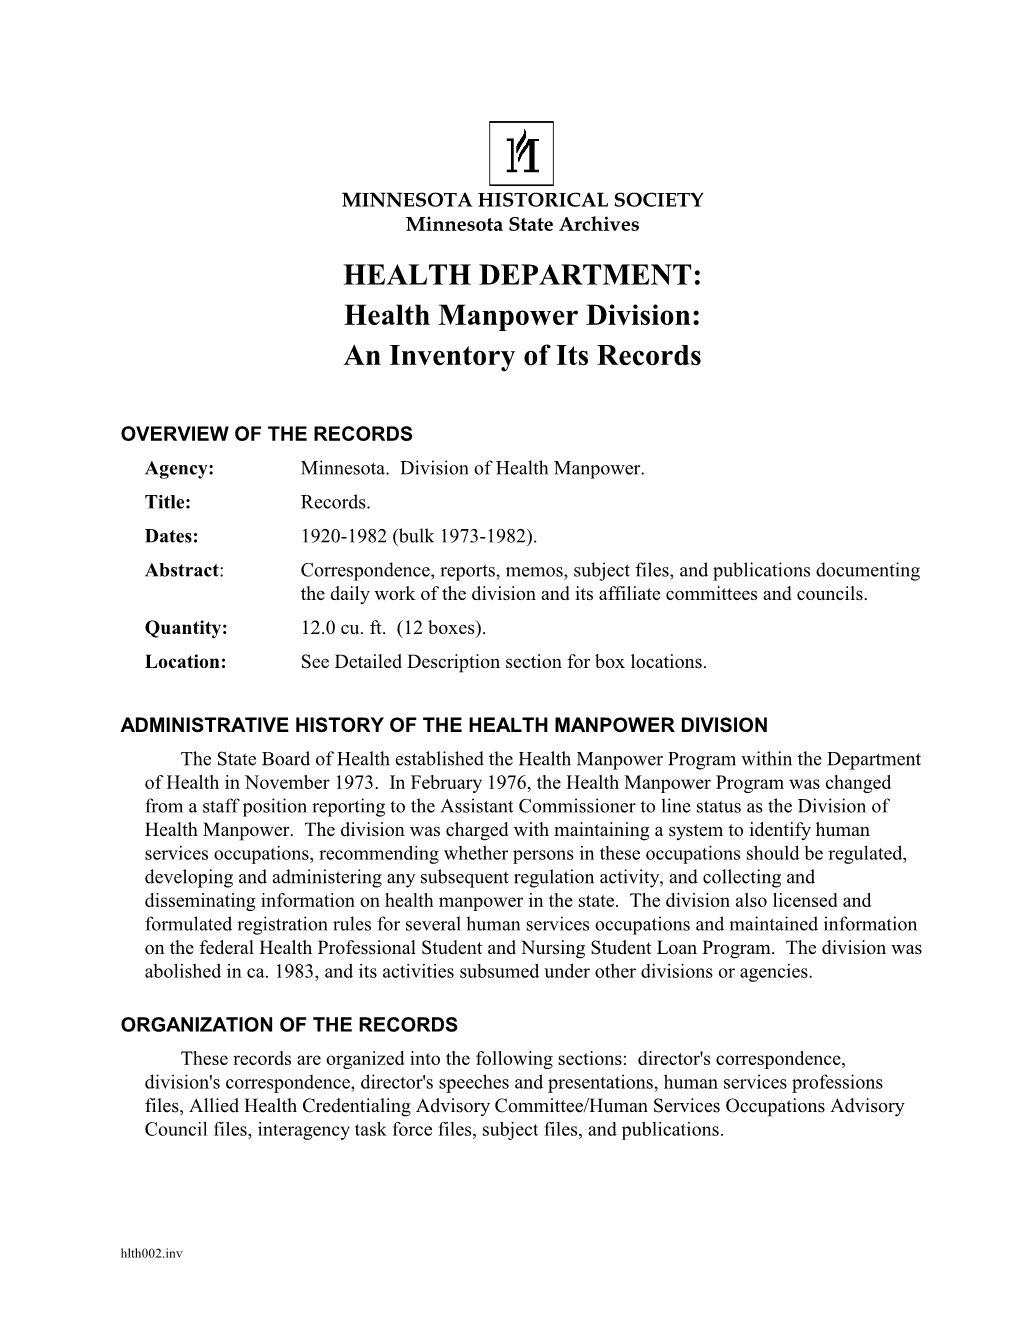 HEALTH DEPARTMENT: Health Manpower Division: an Inventory of Its Records